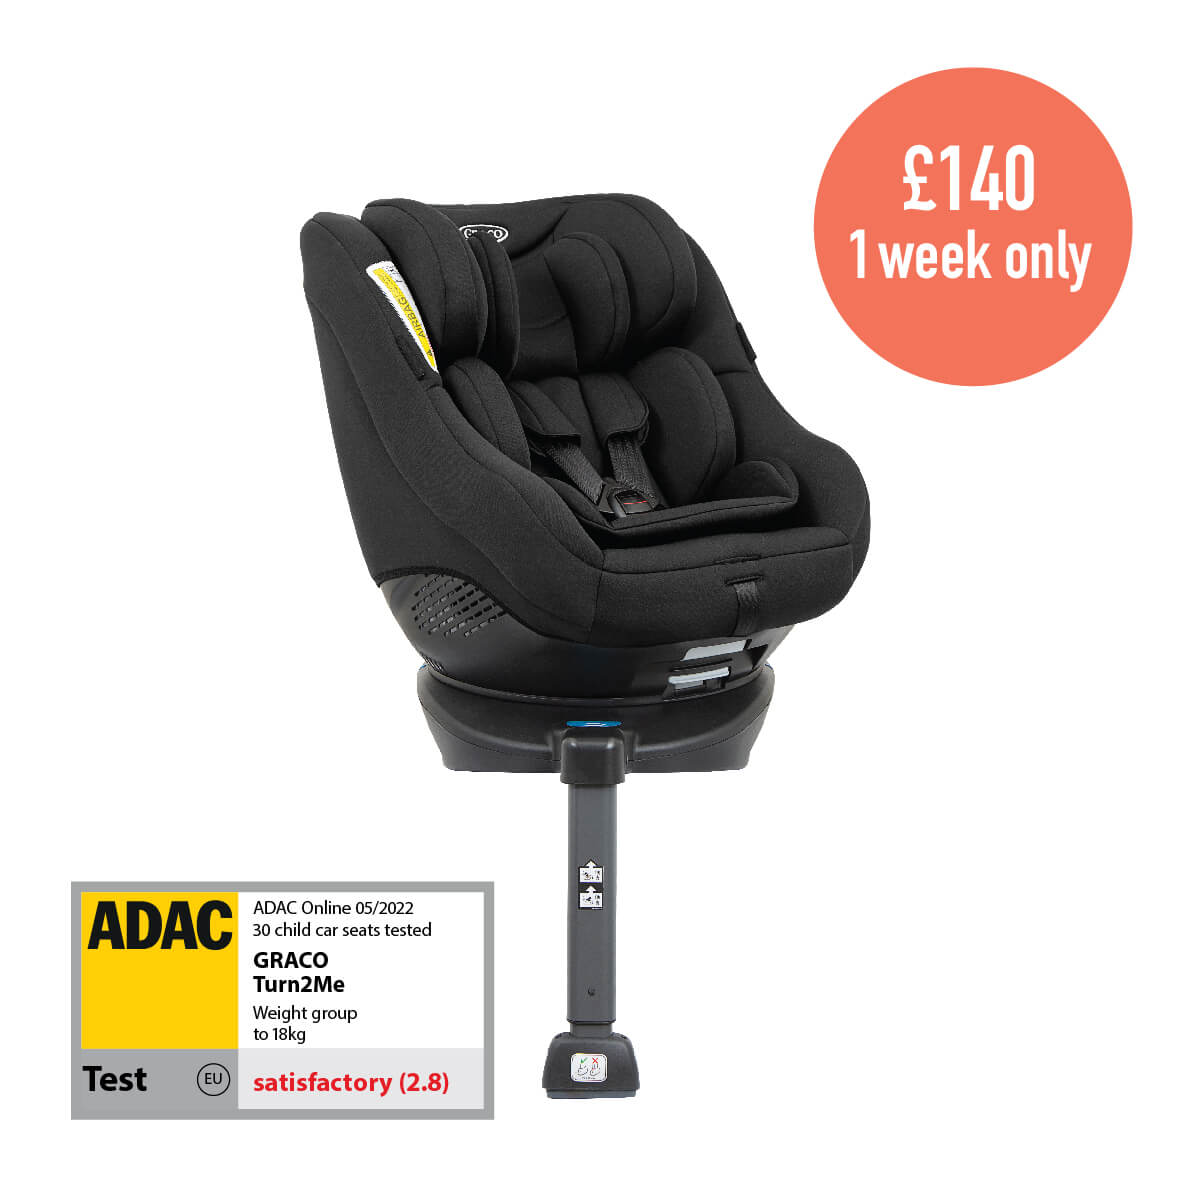 Three quarter image of Graco Turn2Me 360 rotating ISOFIX car seat in black fashion on white background with text that says £140, 1 week only with ADAC logo.